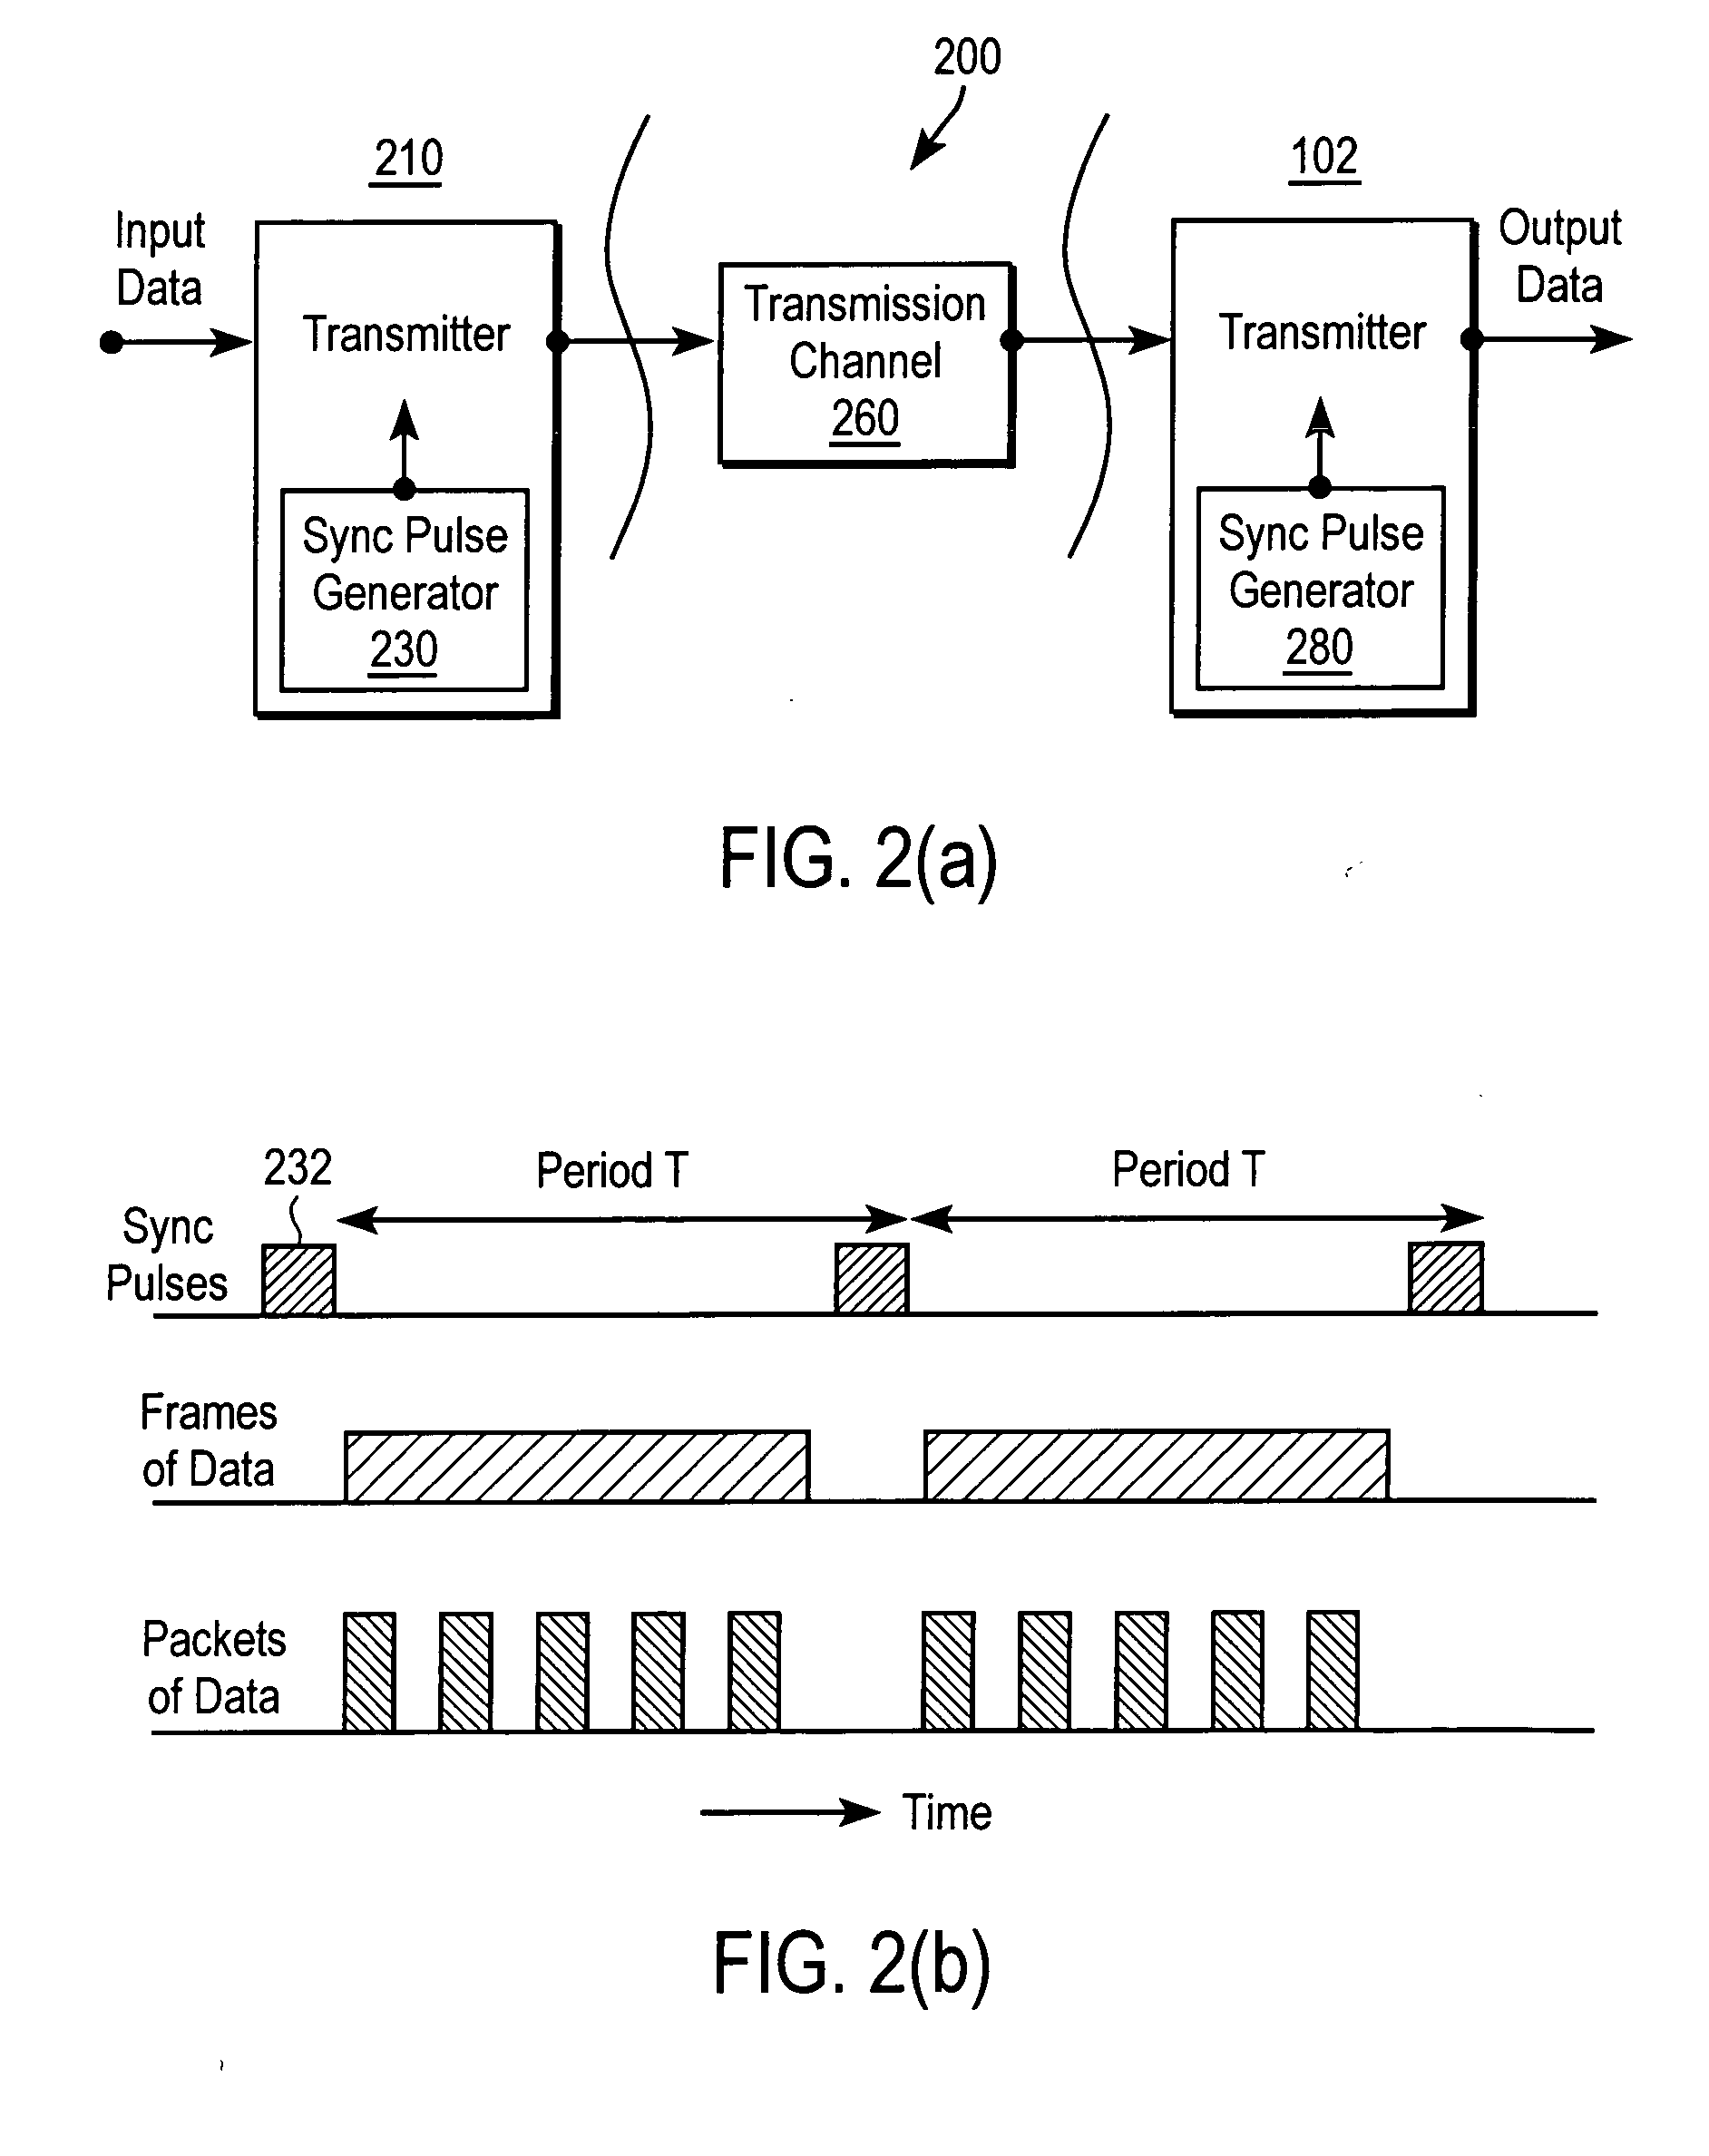 System for transmission of synchronous video with compression through channels with varying transmission delay